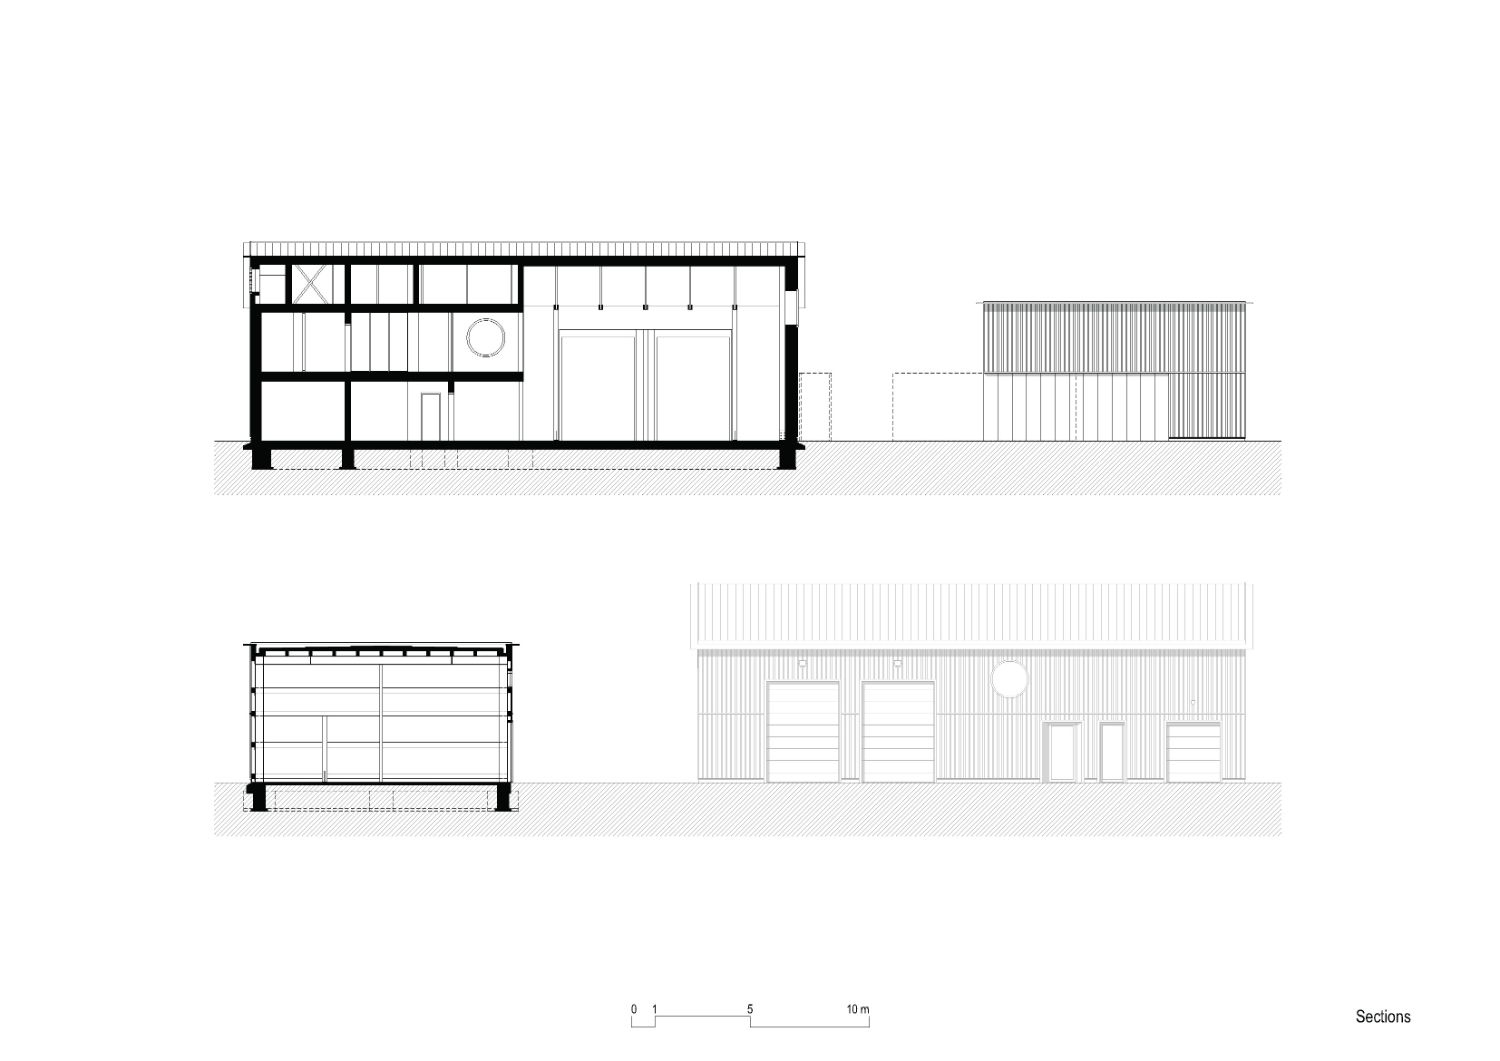 Sections drawings of Three Houses and a Yard